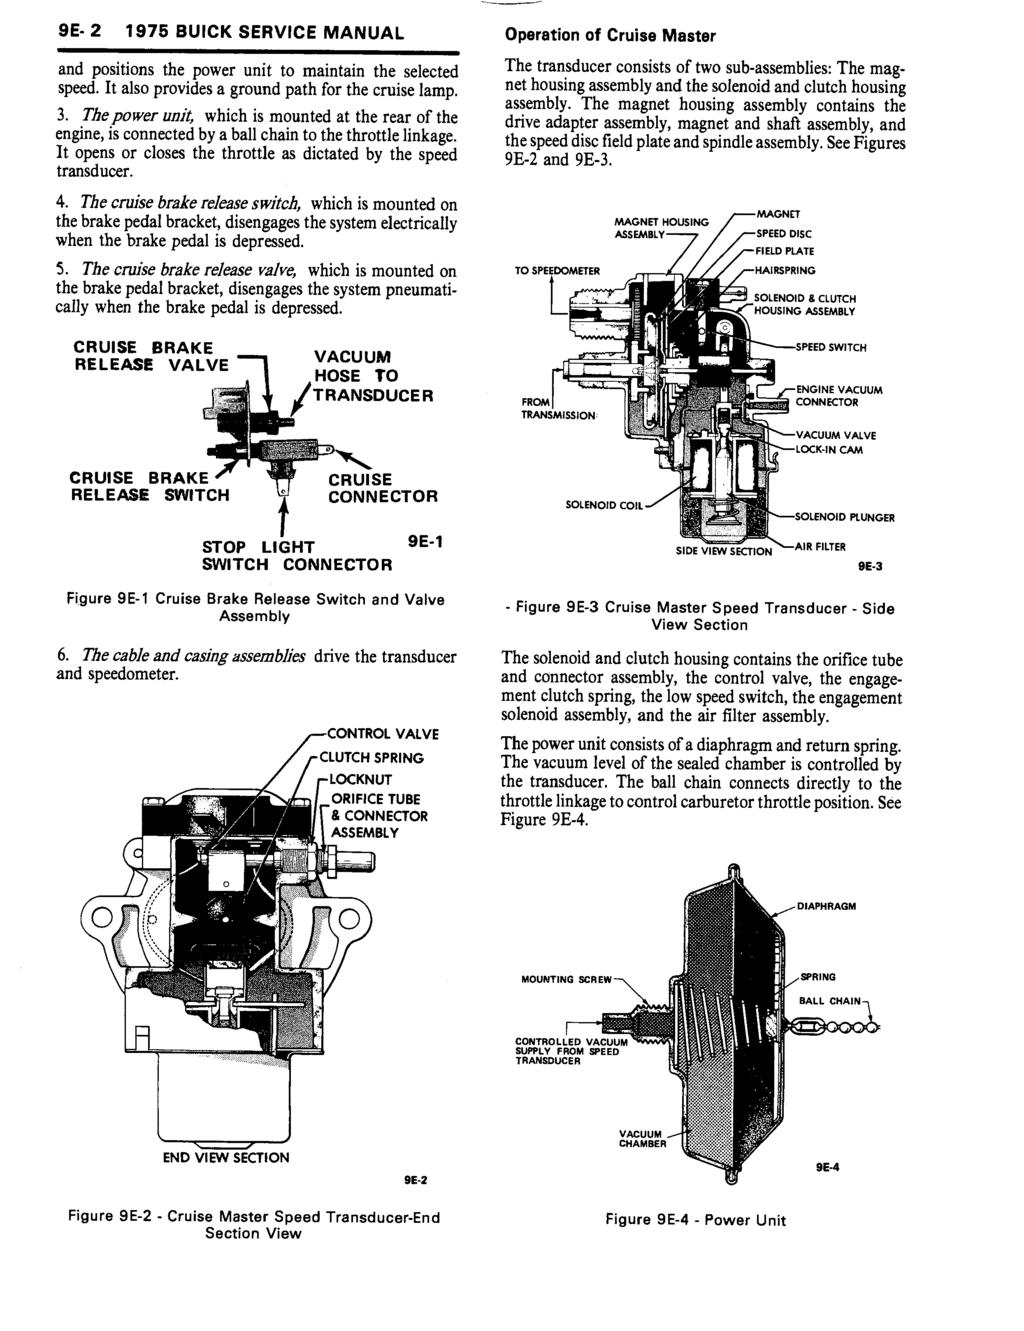 9E- 2 1975 BUICK SERVICE MANUAL and positions the power unit to maintain the selected speed. It also provides a ground path for the cruise lamp. 3.